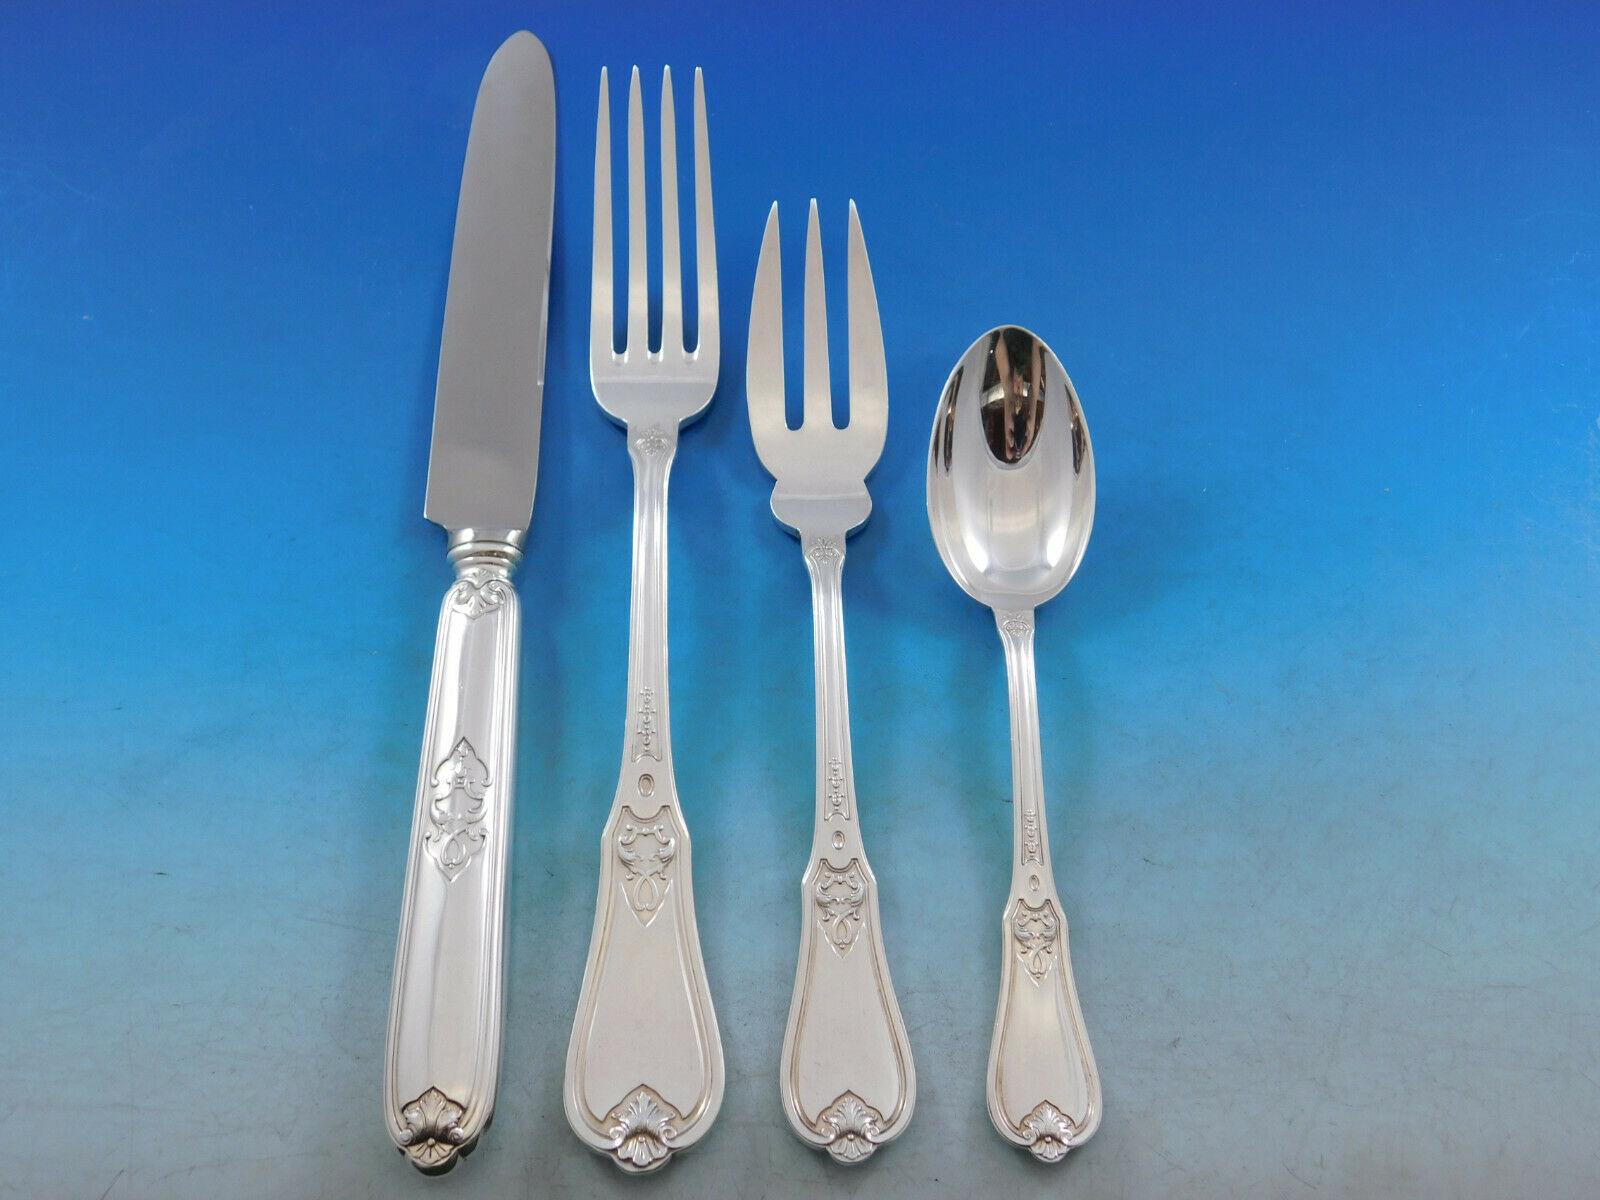 Dinner size Alicante by Buccellati Italy Silverplated Flatware set, 20 pieces. Great starter set! This set includes:


4 Dinner Size Knives, pointed, 10